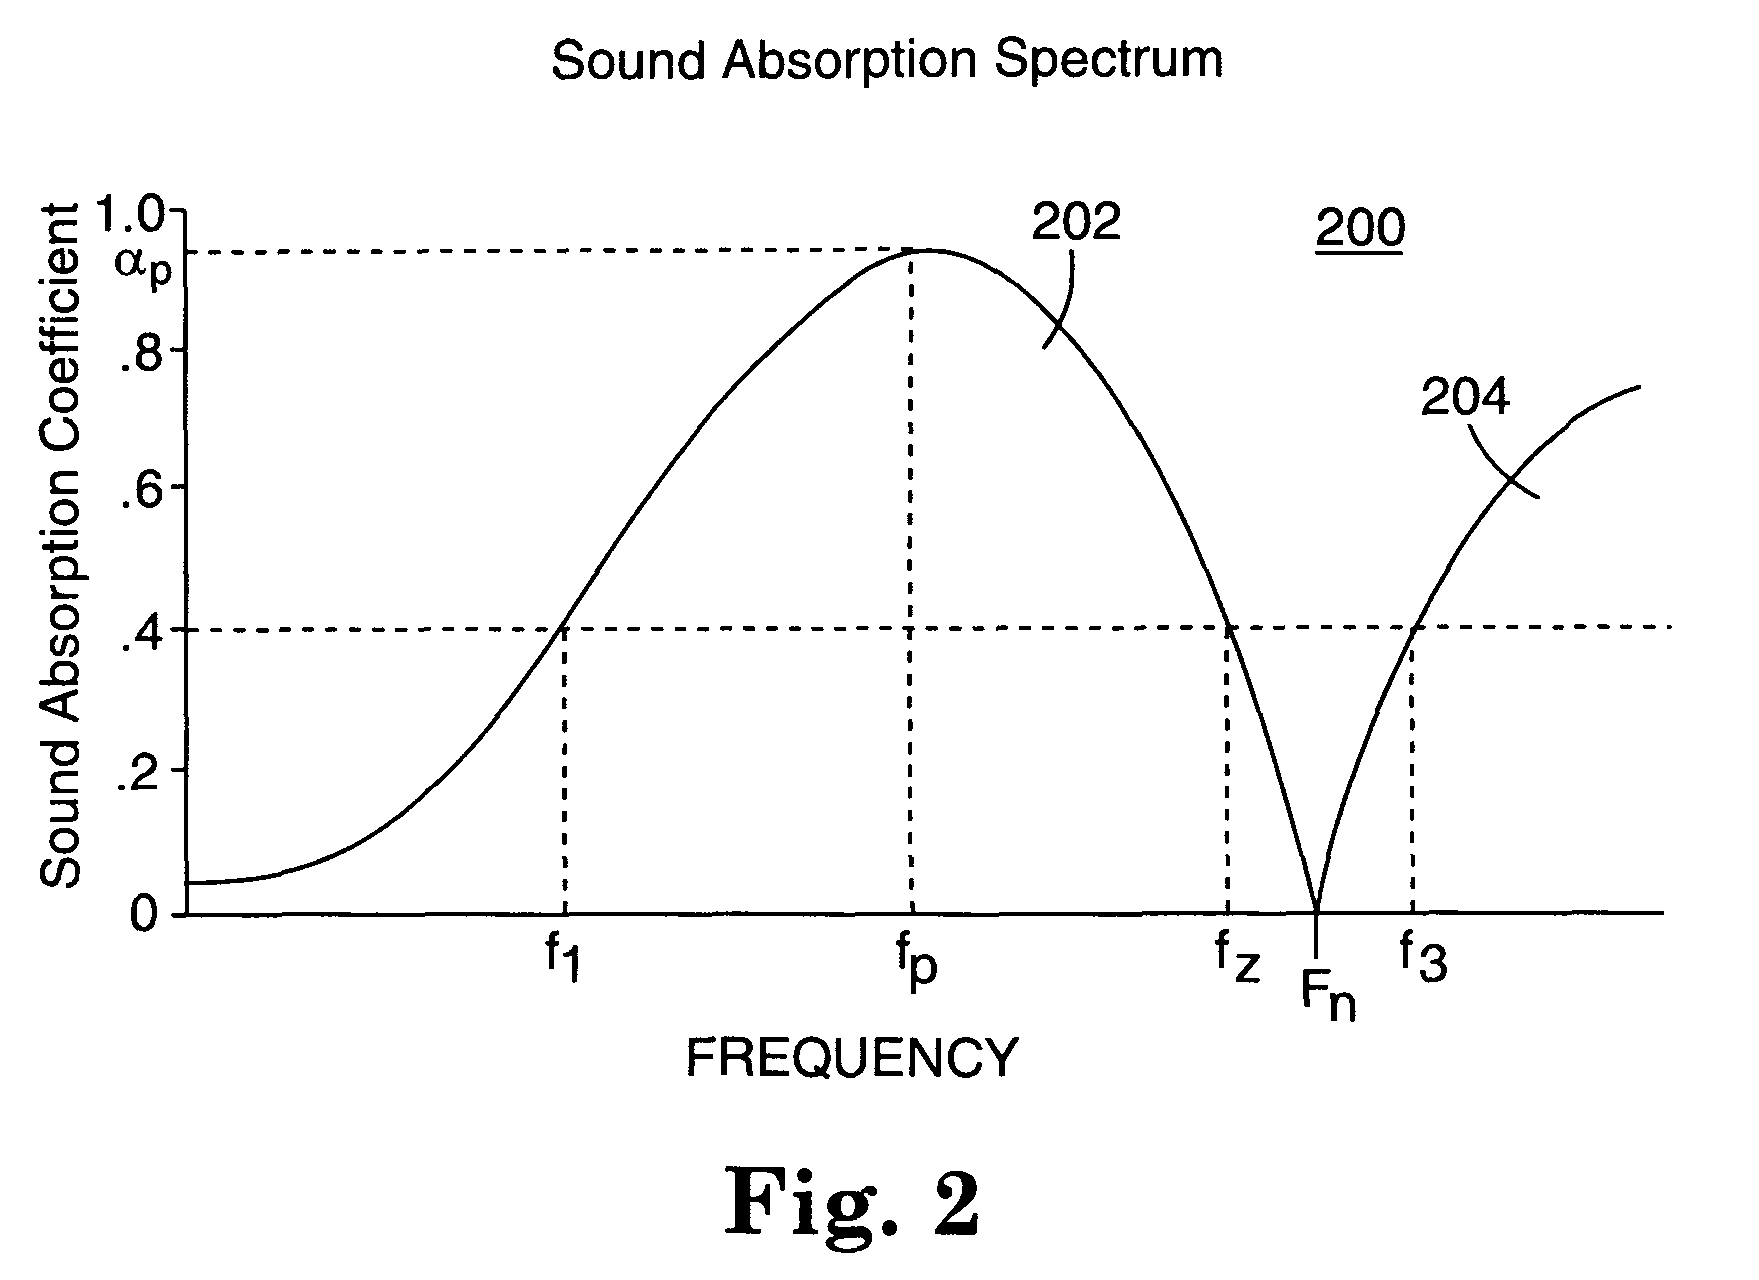 Process of forming a microperforated polymeric film for sound absorption